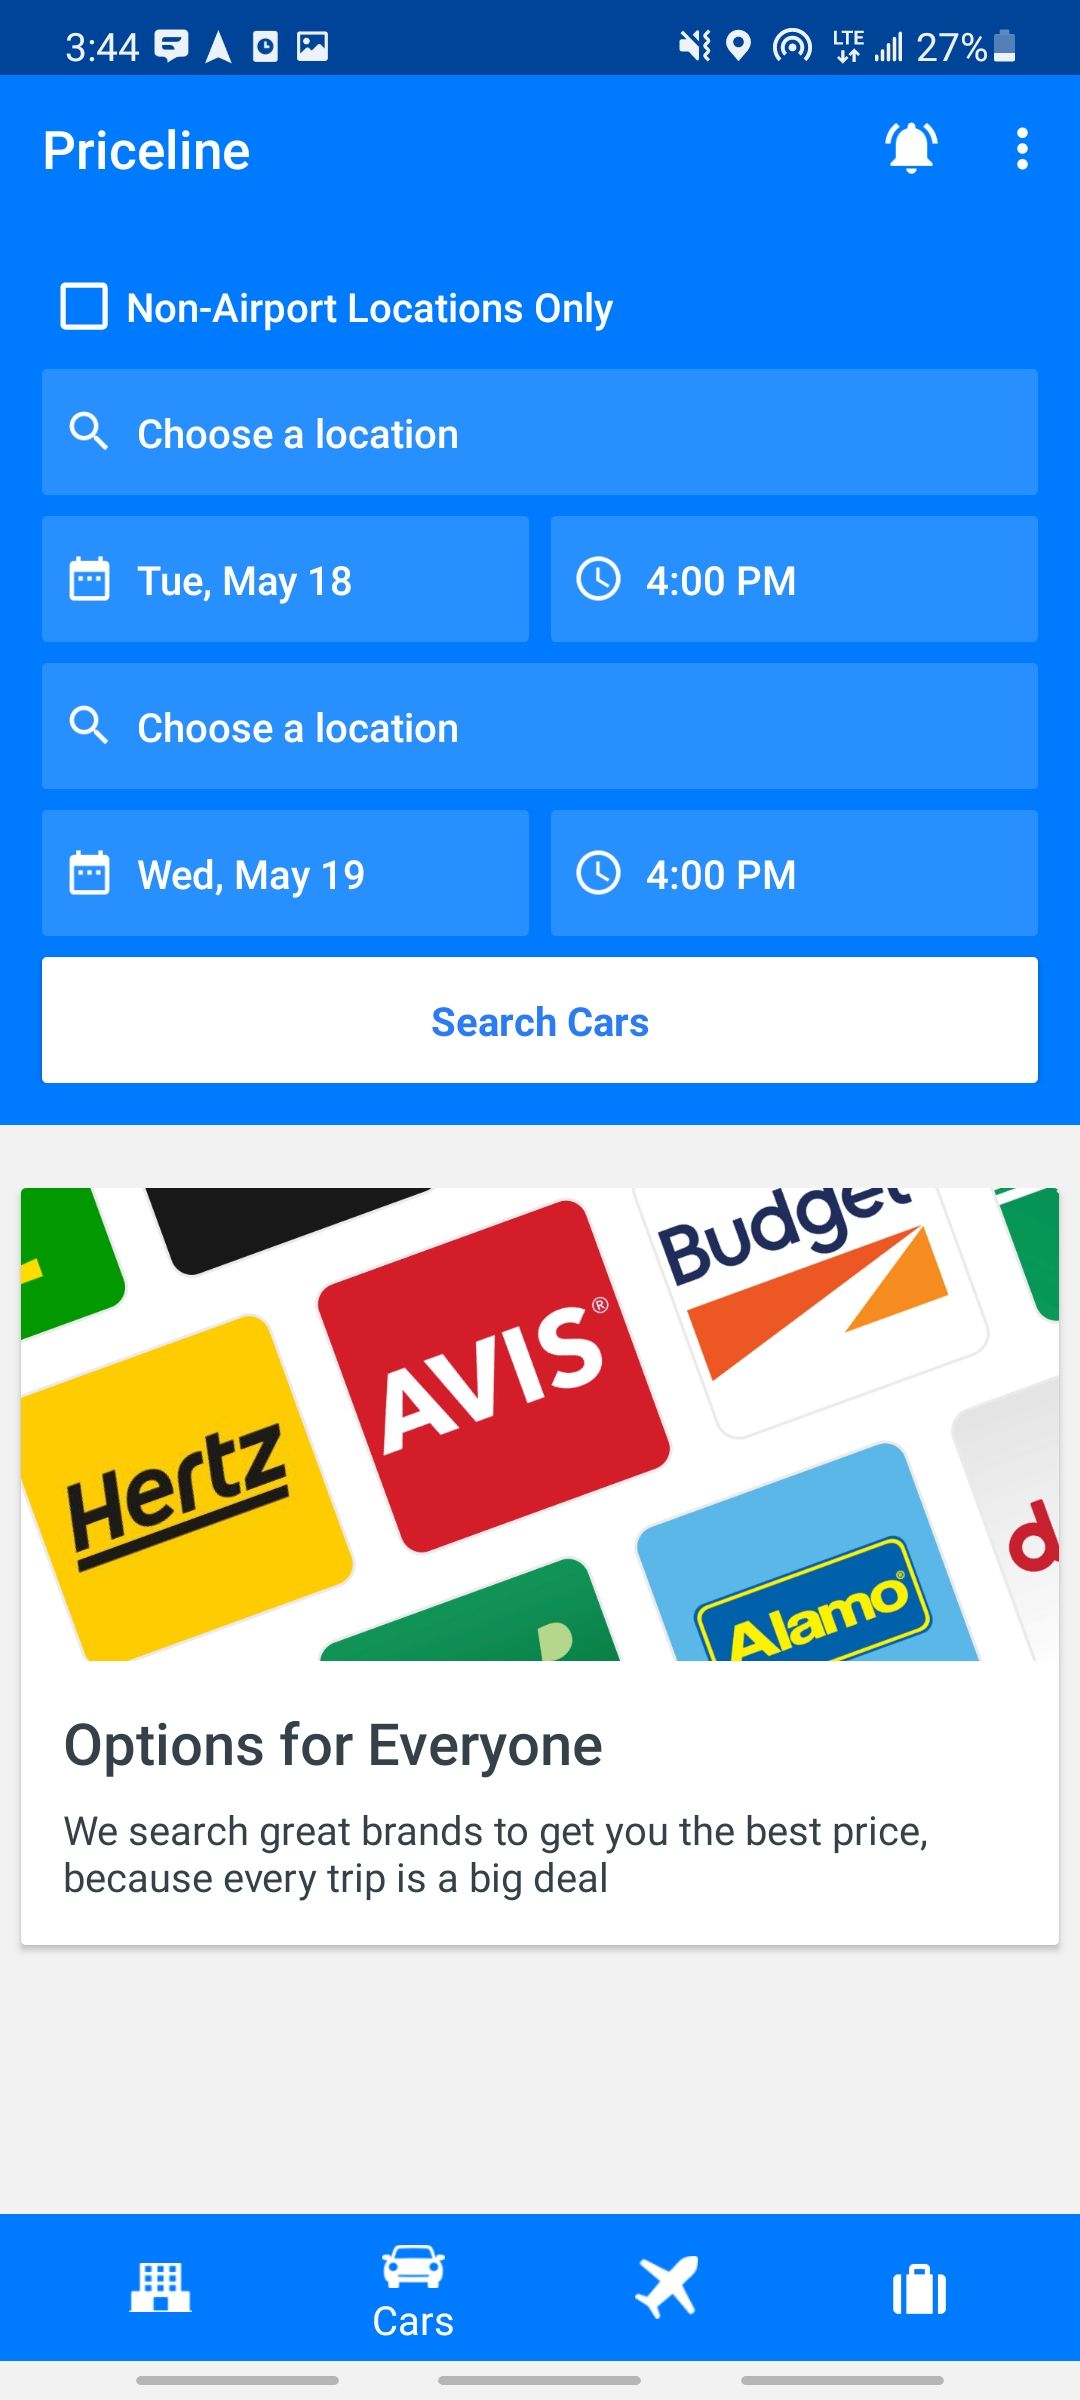 priceline app setting location and time information for car rental